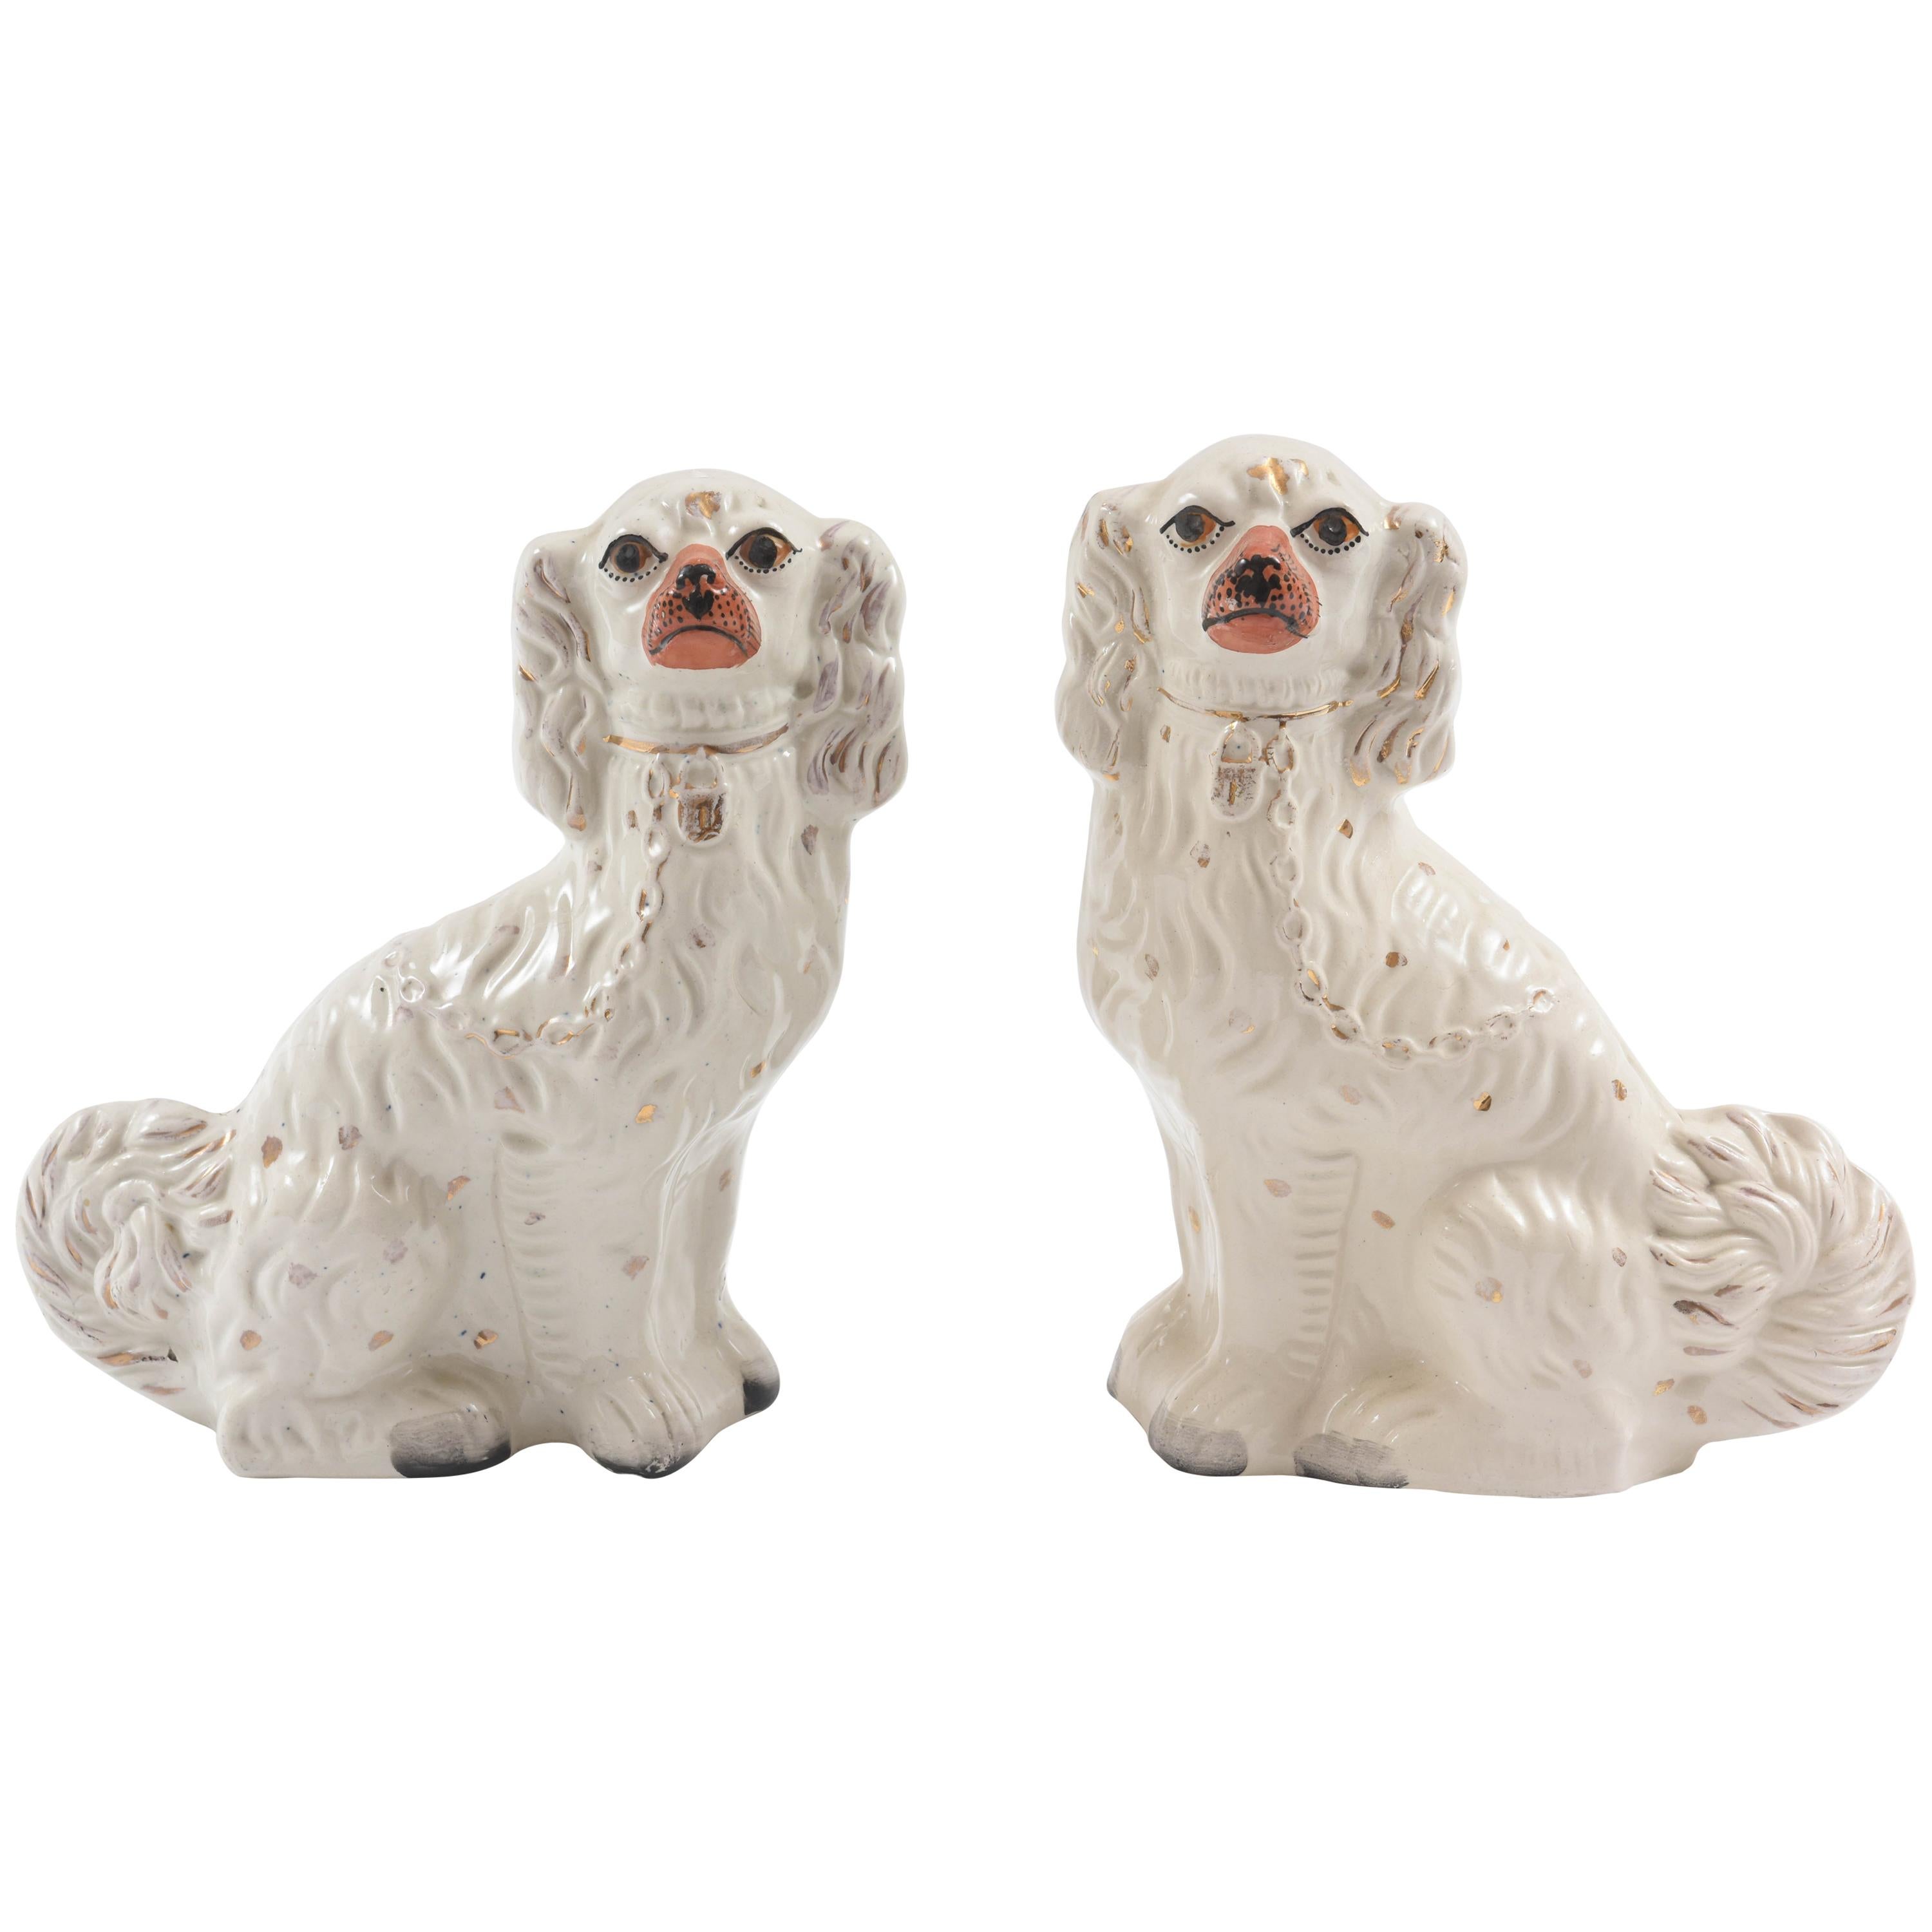 Pair of Staffordshire Dogs, 19th Century with Charming Expressions